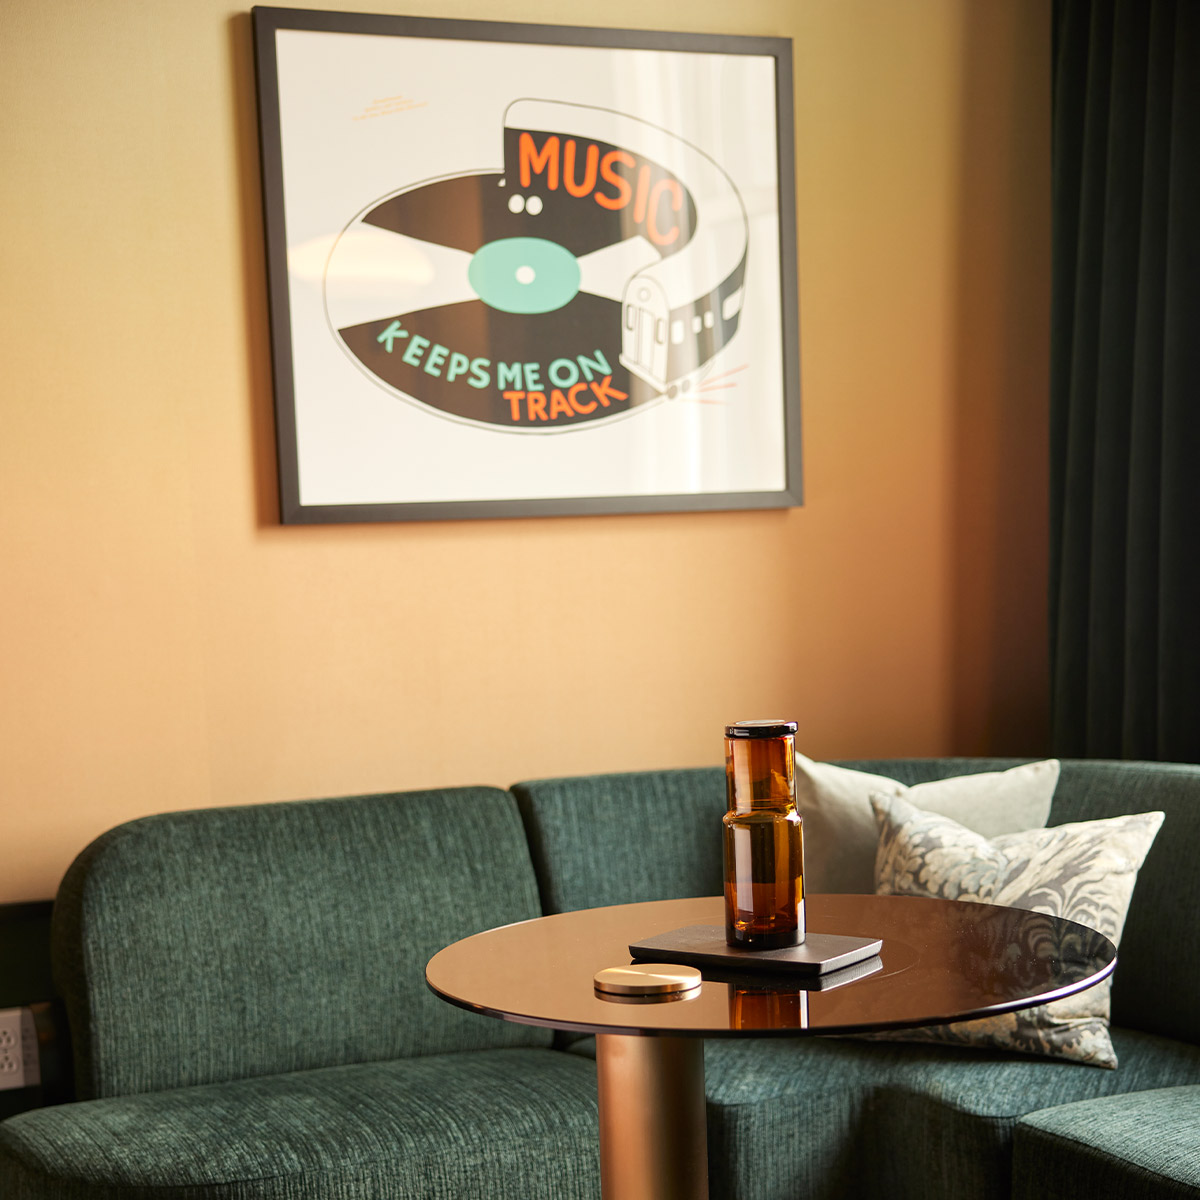 A cozy room corner featuring a small round table with a brown bottle and an open book, a green sofa with a pillow, and a framed poster proclaiming 